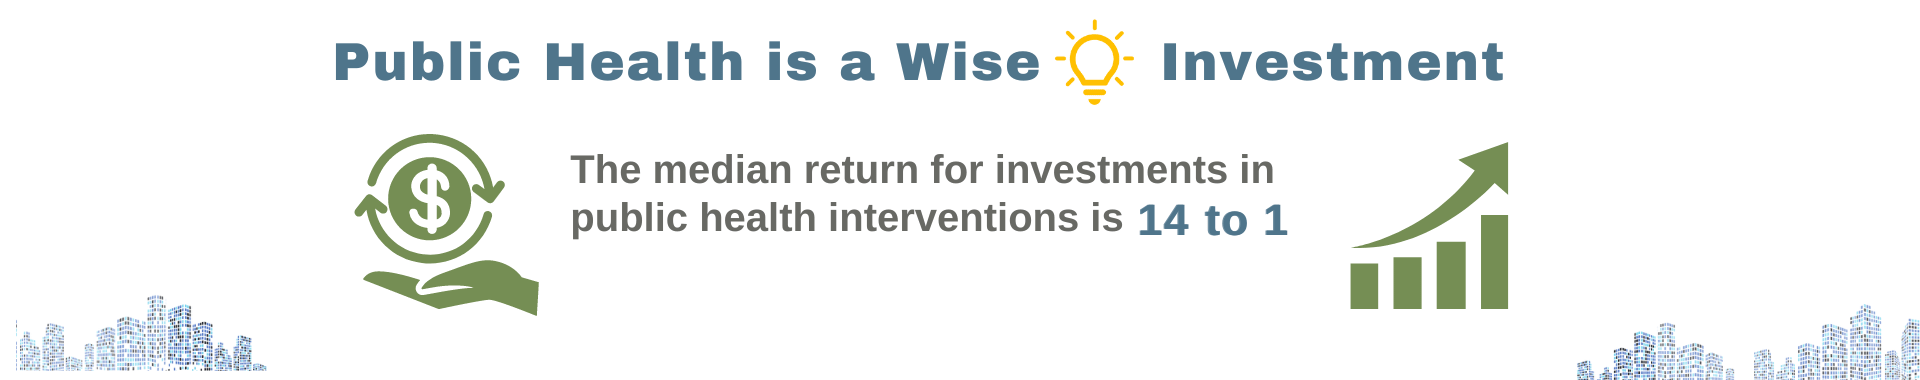 Graphic - Public Health is a Wise Investment. The median return for investments in public health interventions is 14 ﻿to 1